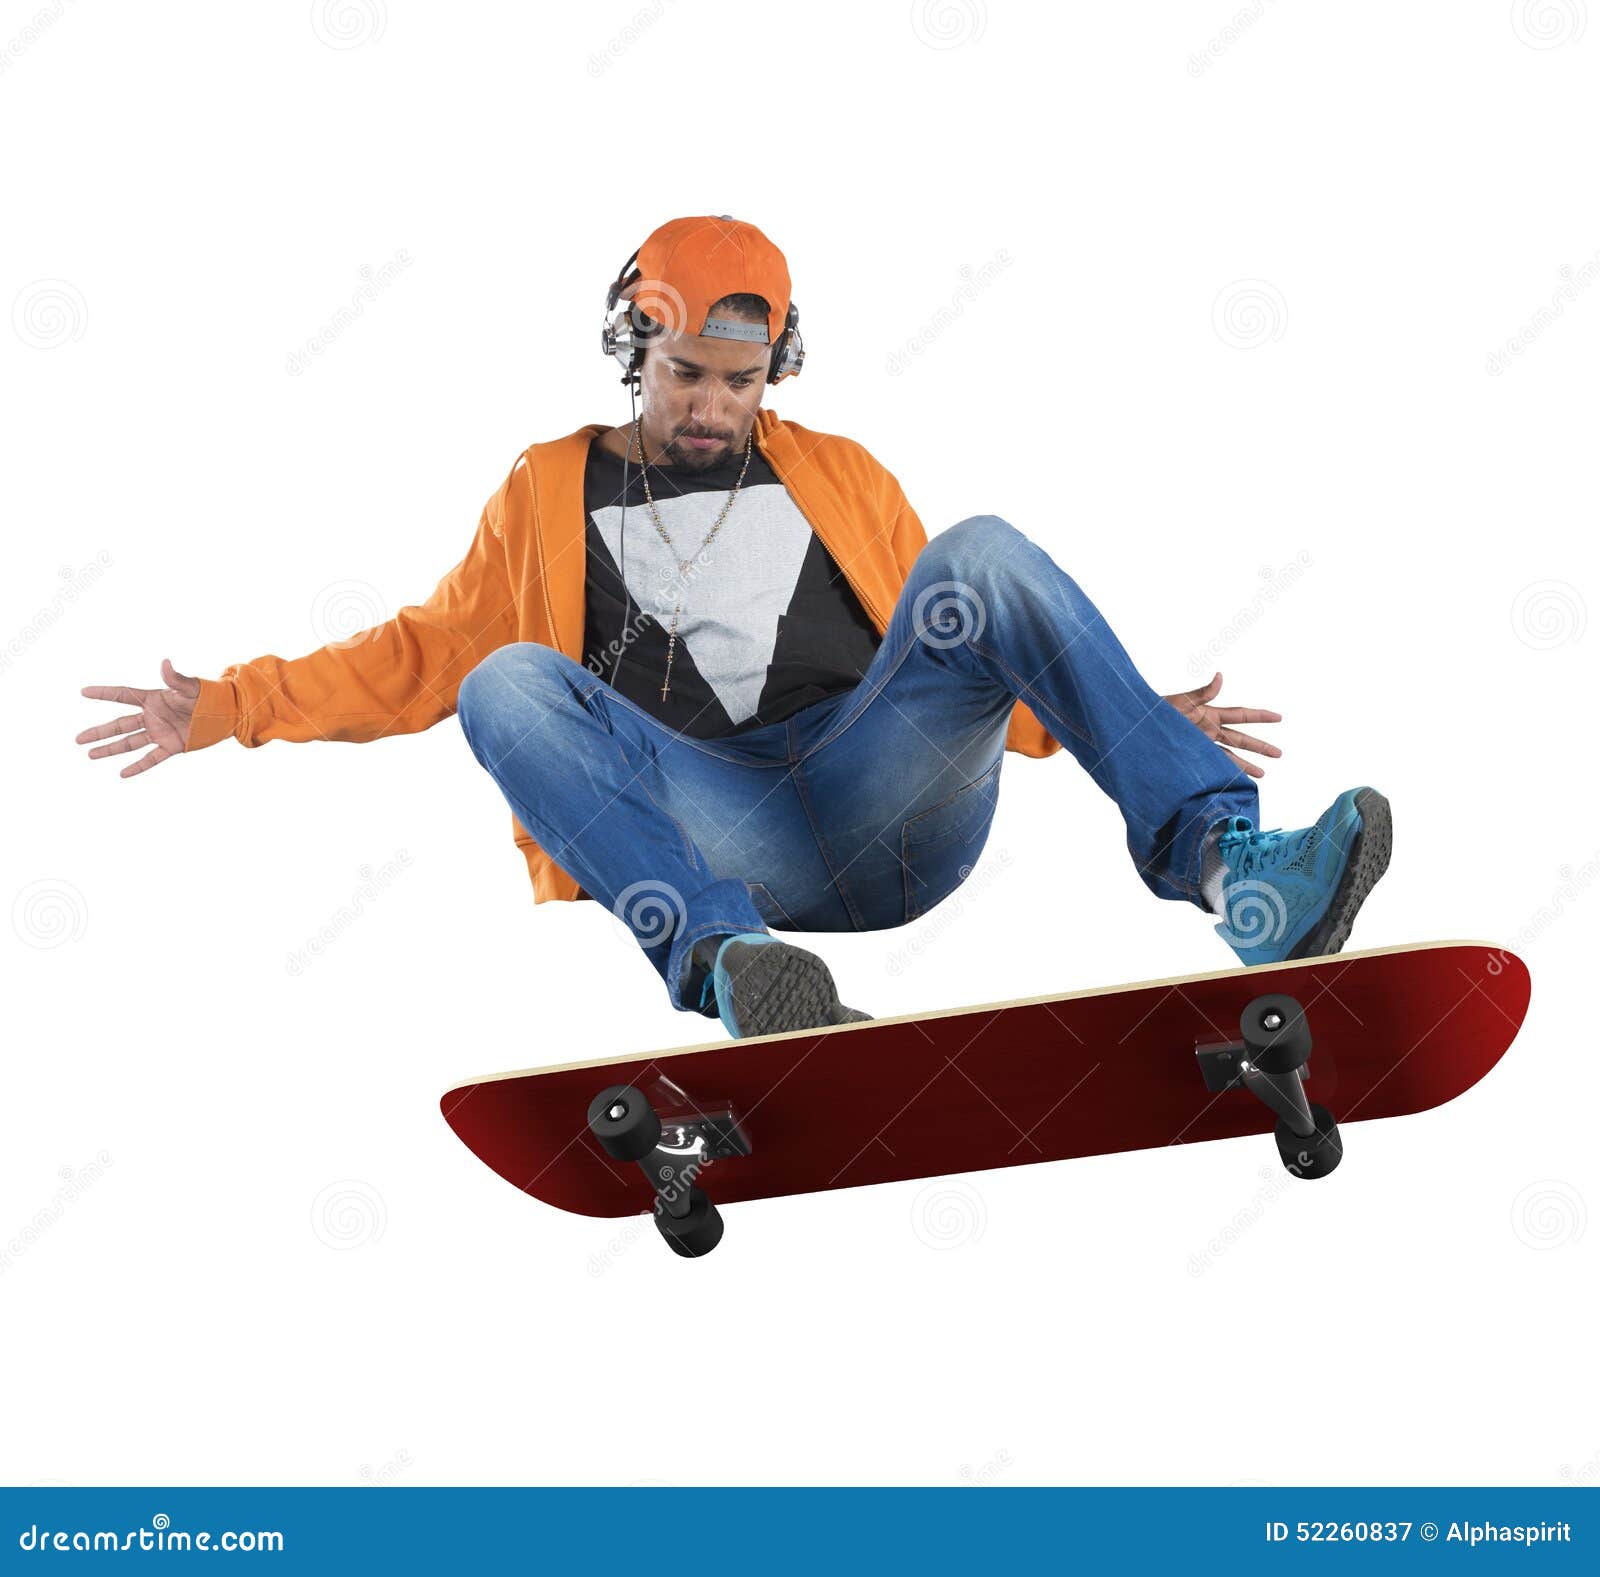 Skate stunts stock image. Image of active, activity, american - 52260837